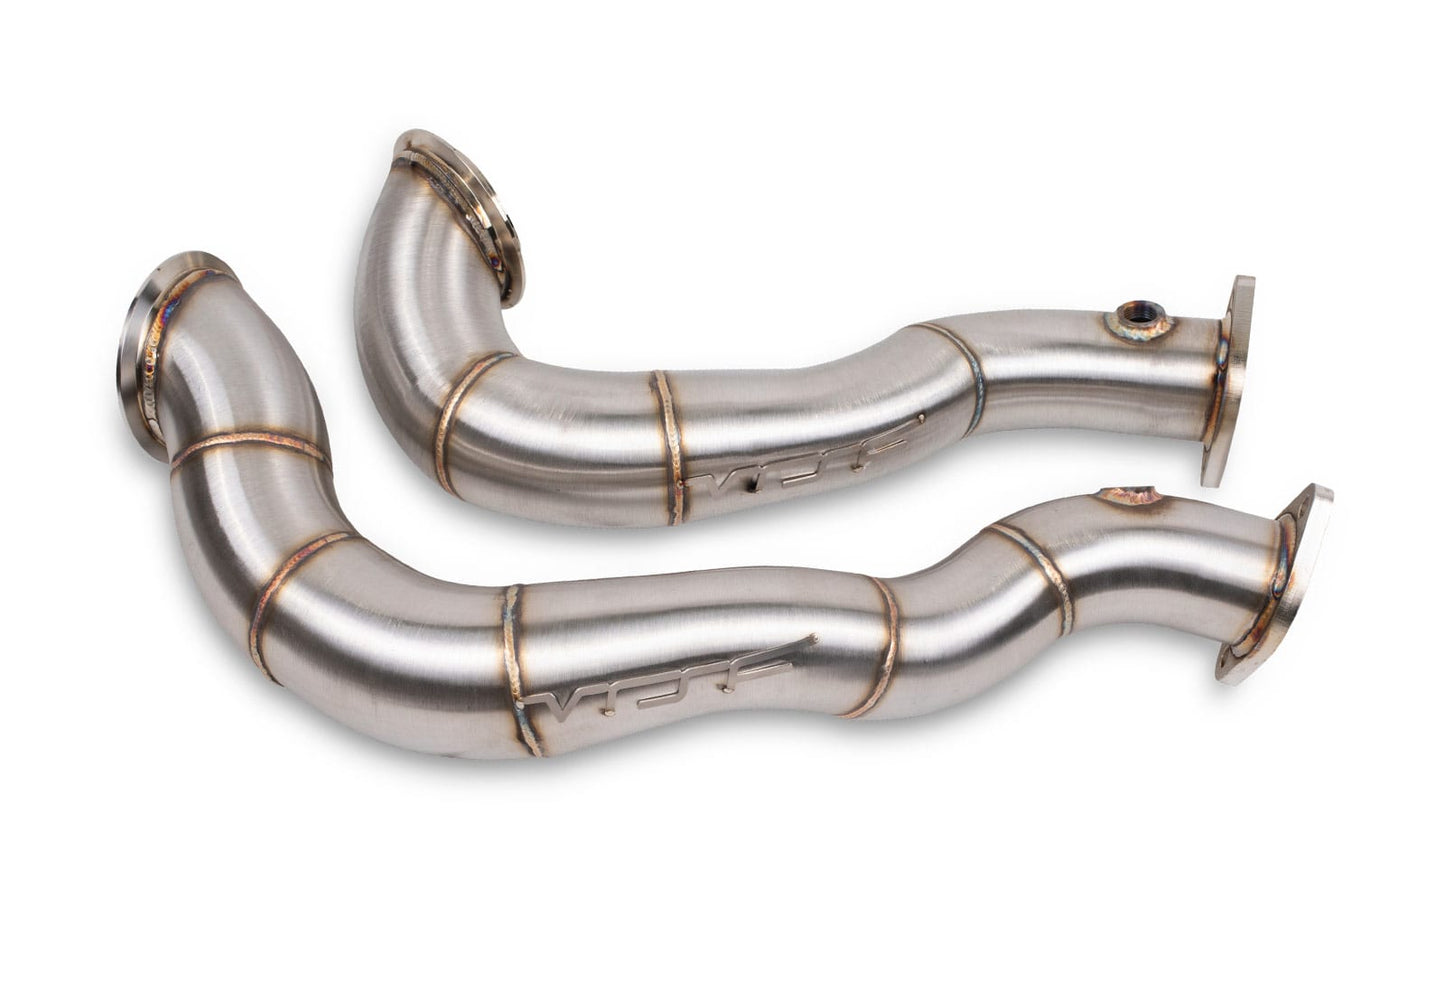 VRSF 3" Race Downpipes for N54 335XI